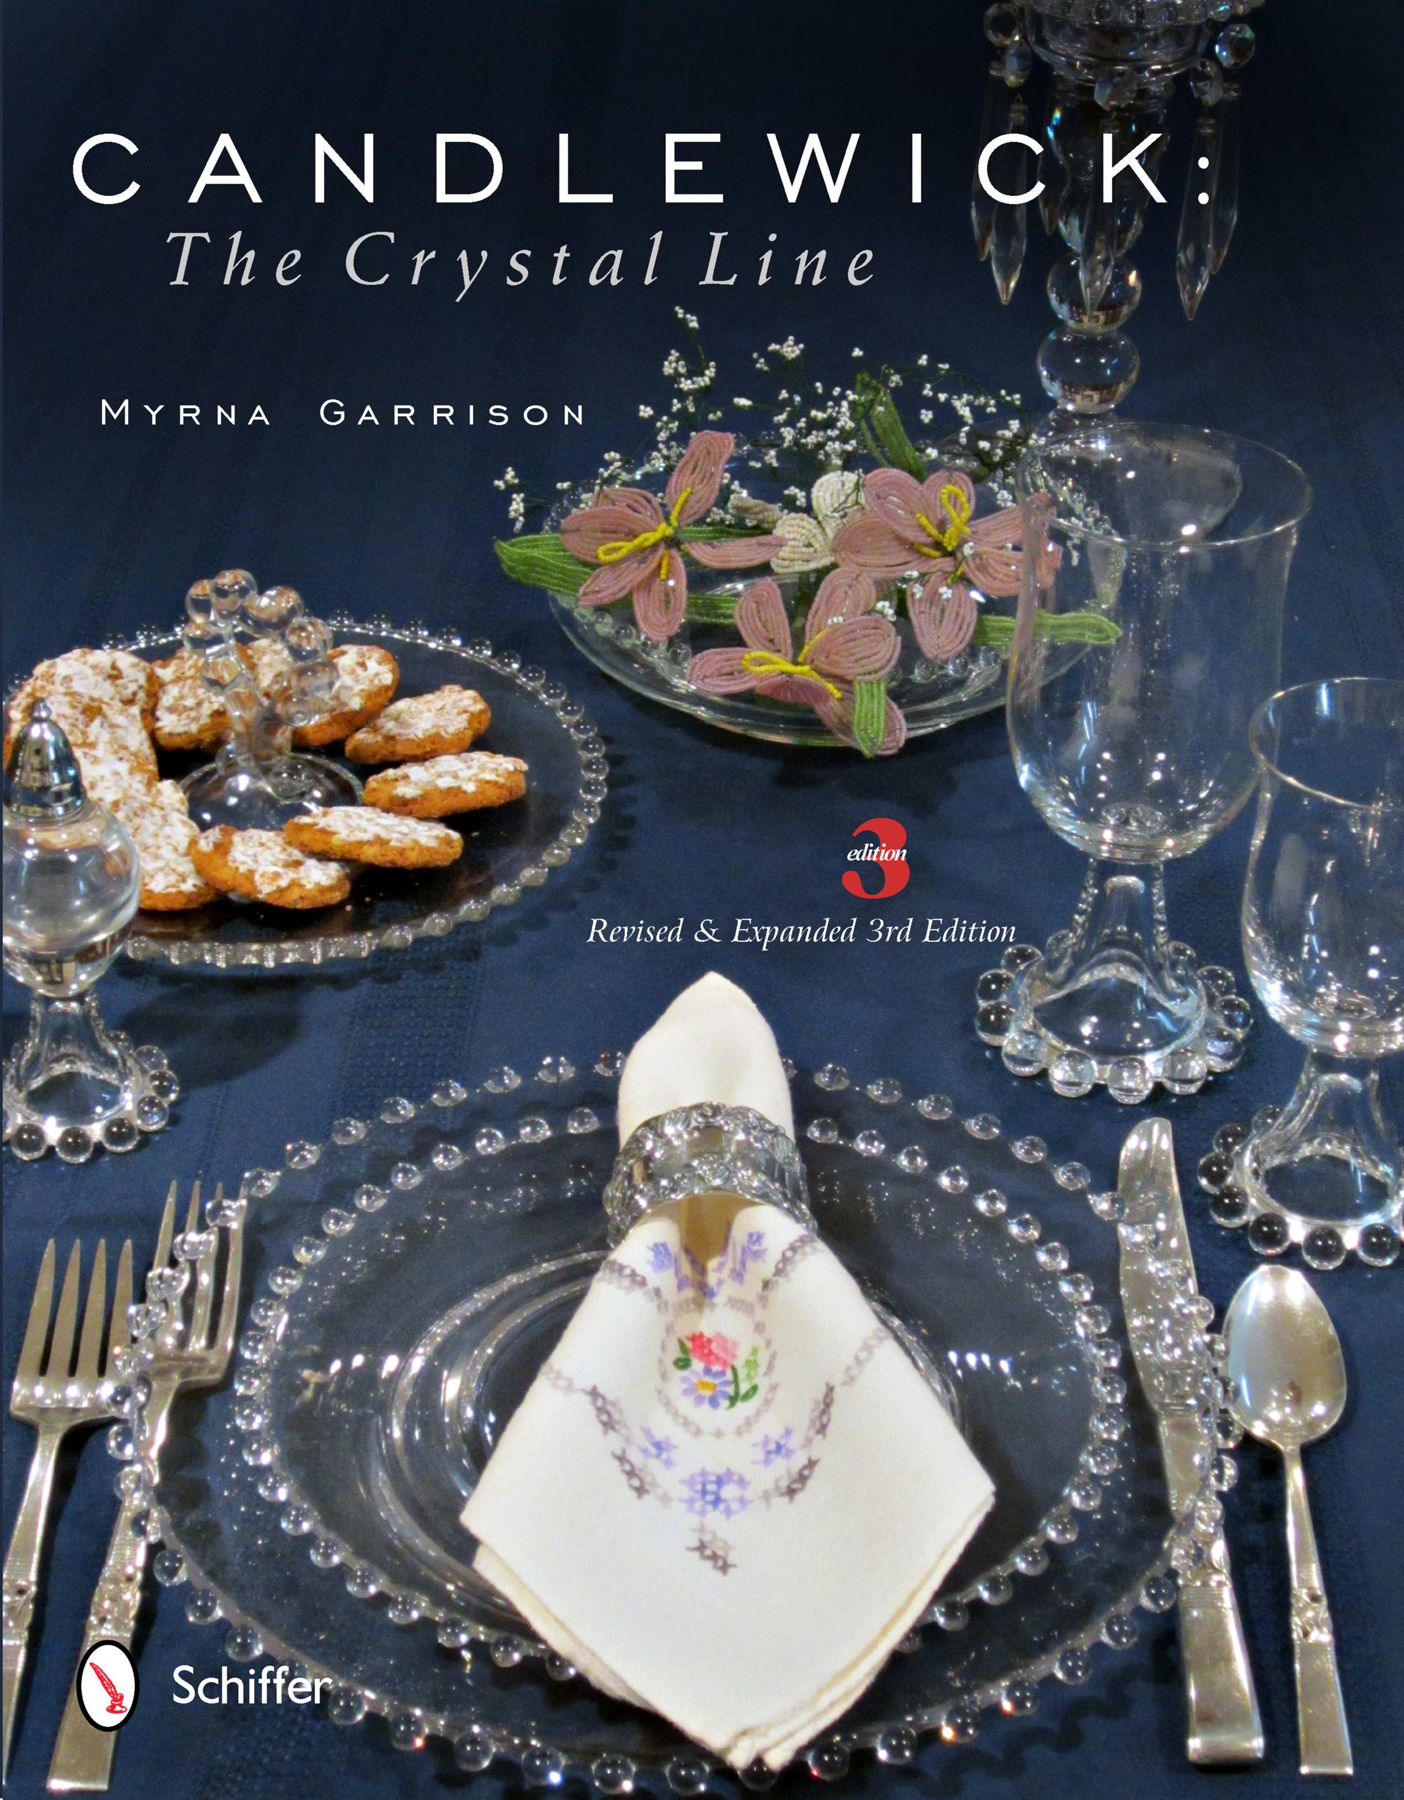 Candlewick: The Crystal Line 3rd Edition